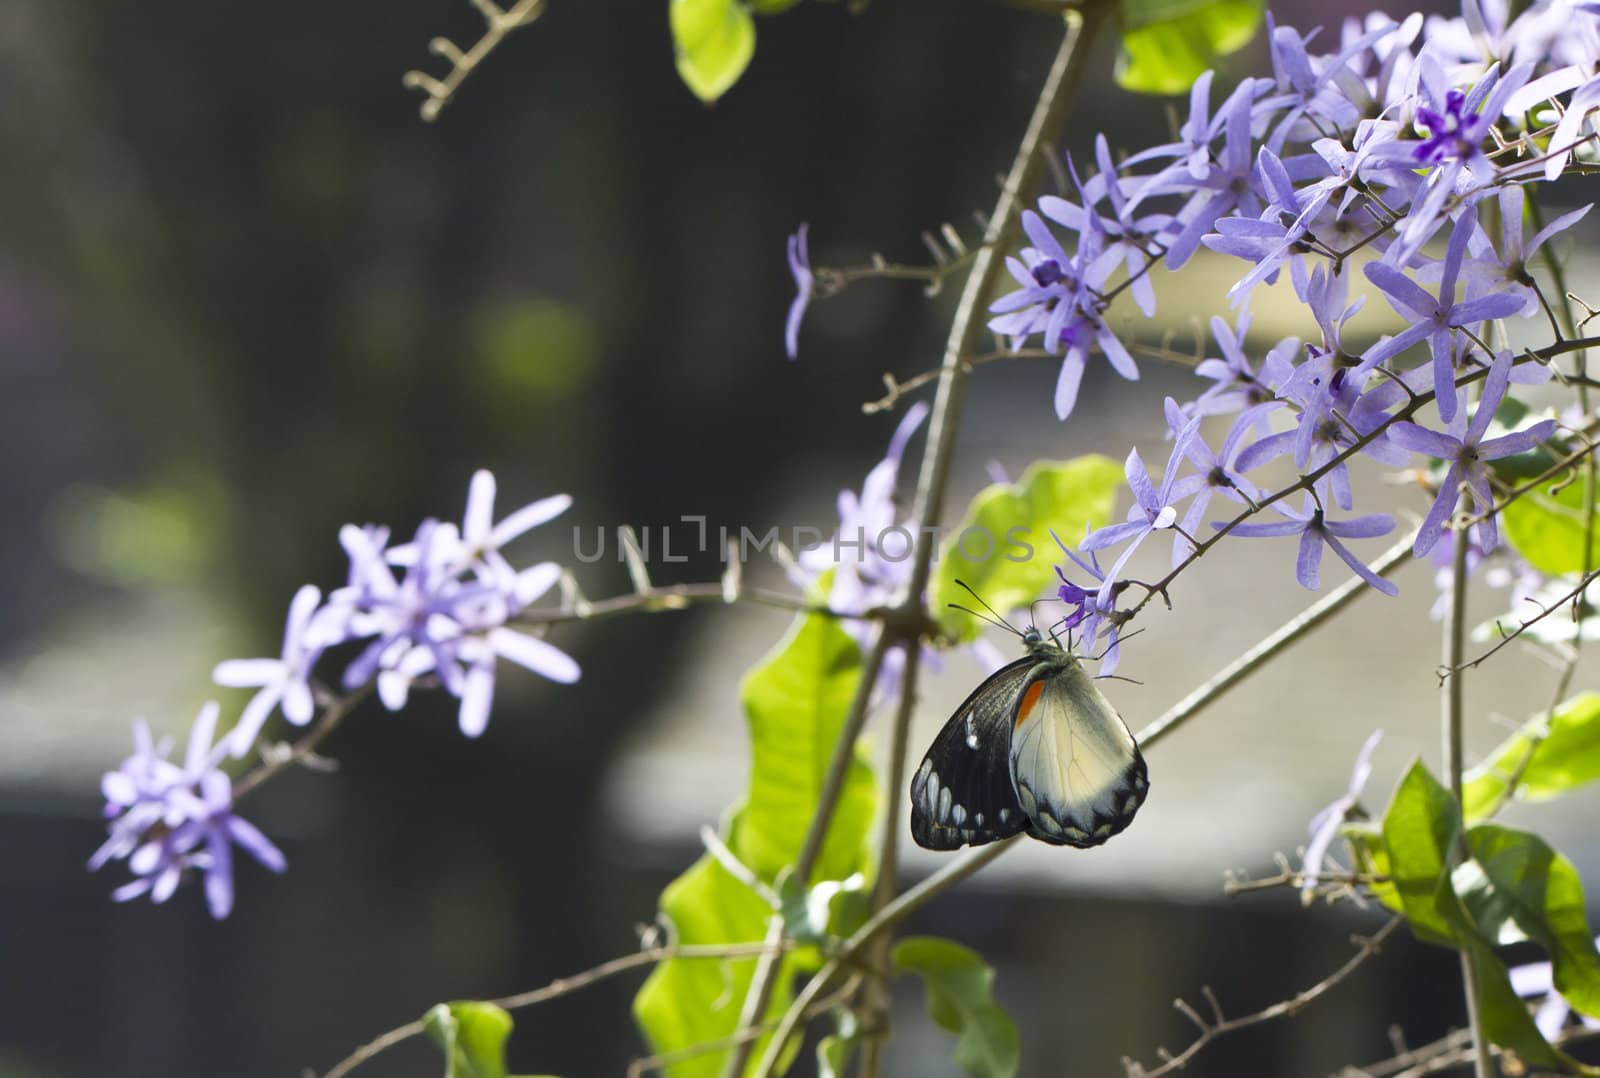 Butterfly collecting nectar from a purple flower in the morning light